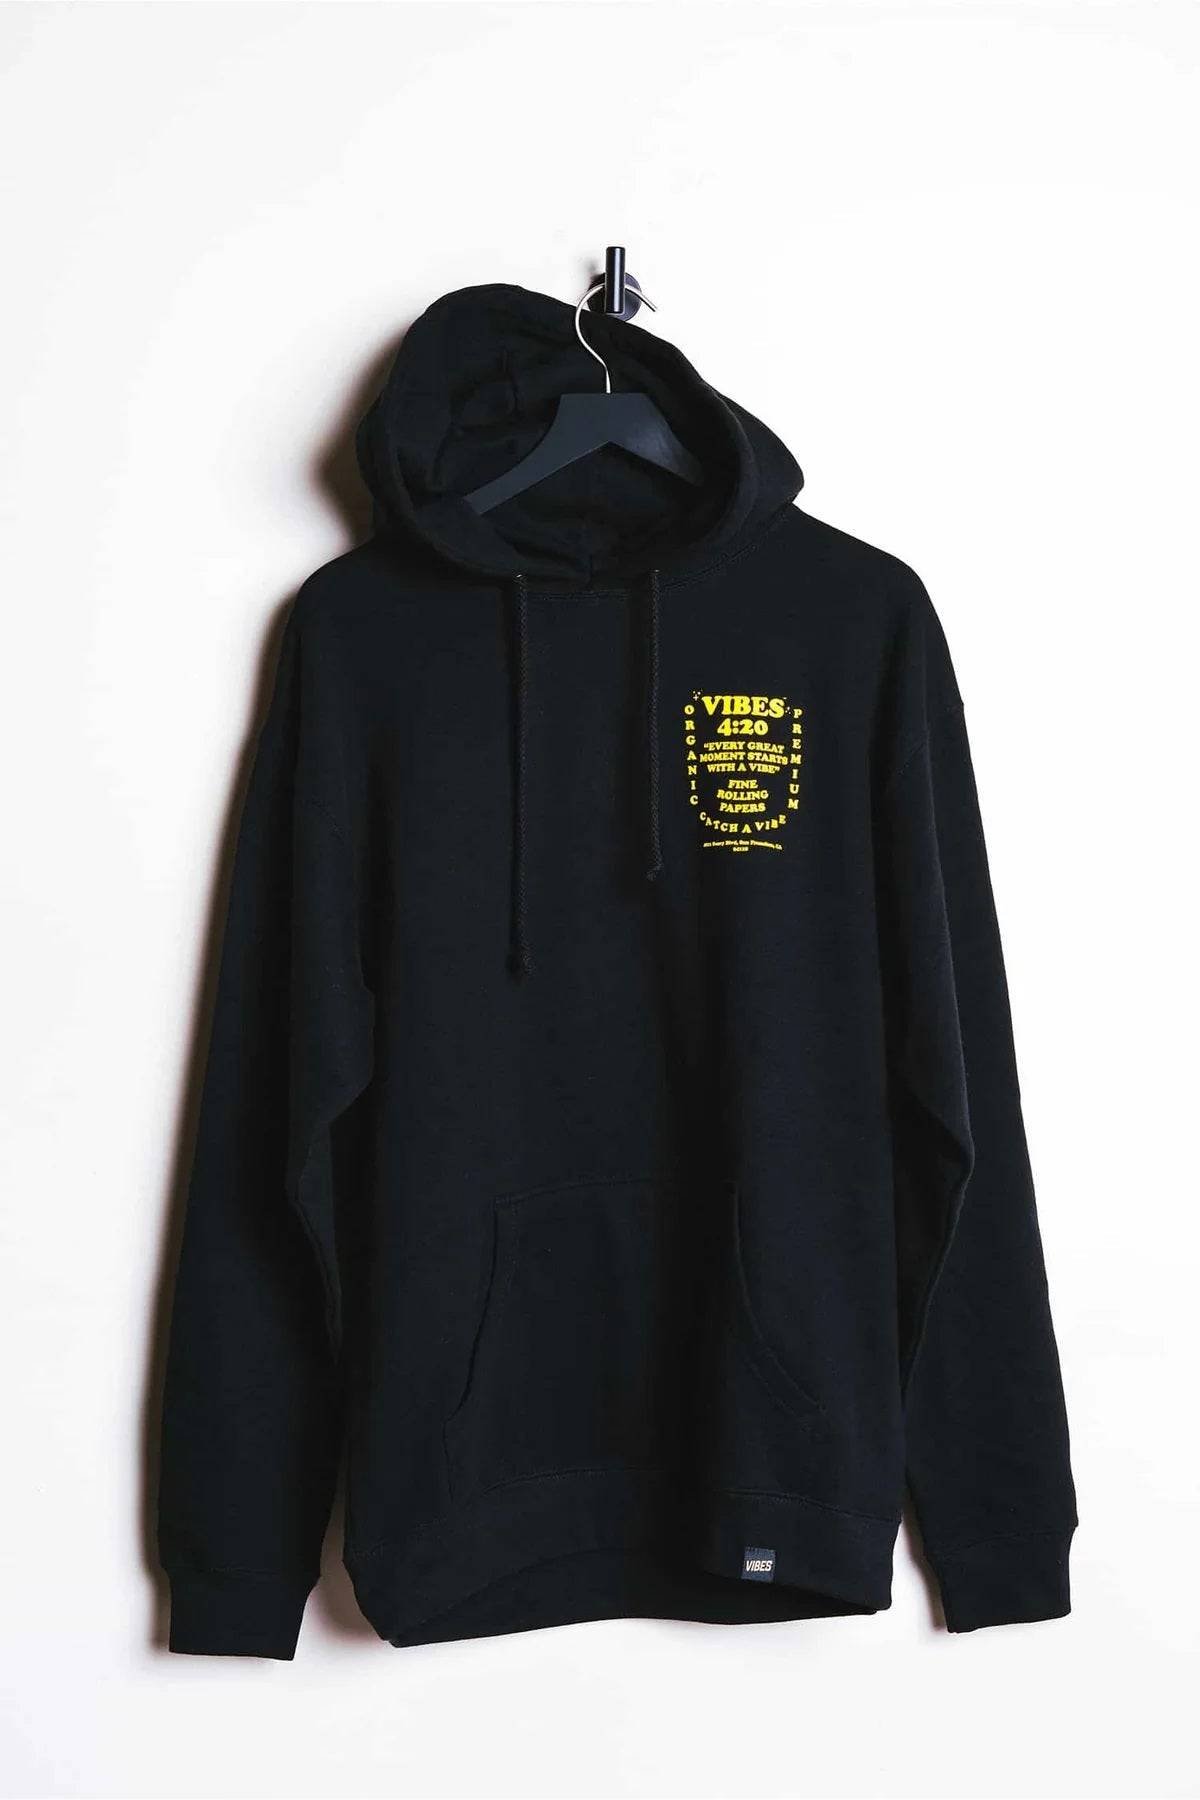 VIBES Black Starts With Vibe Hoodie X-Large